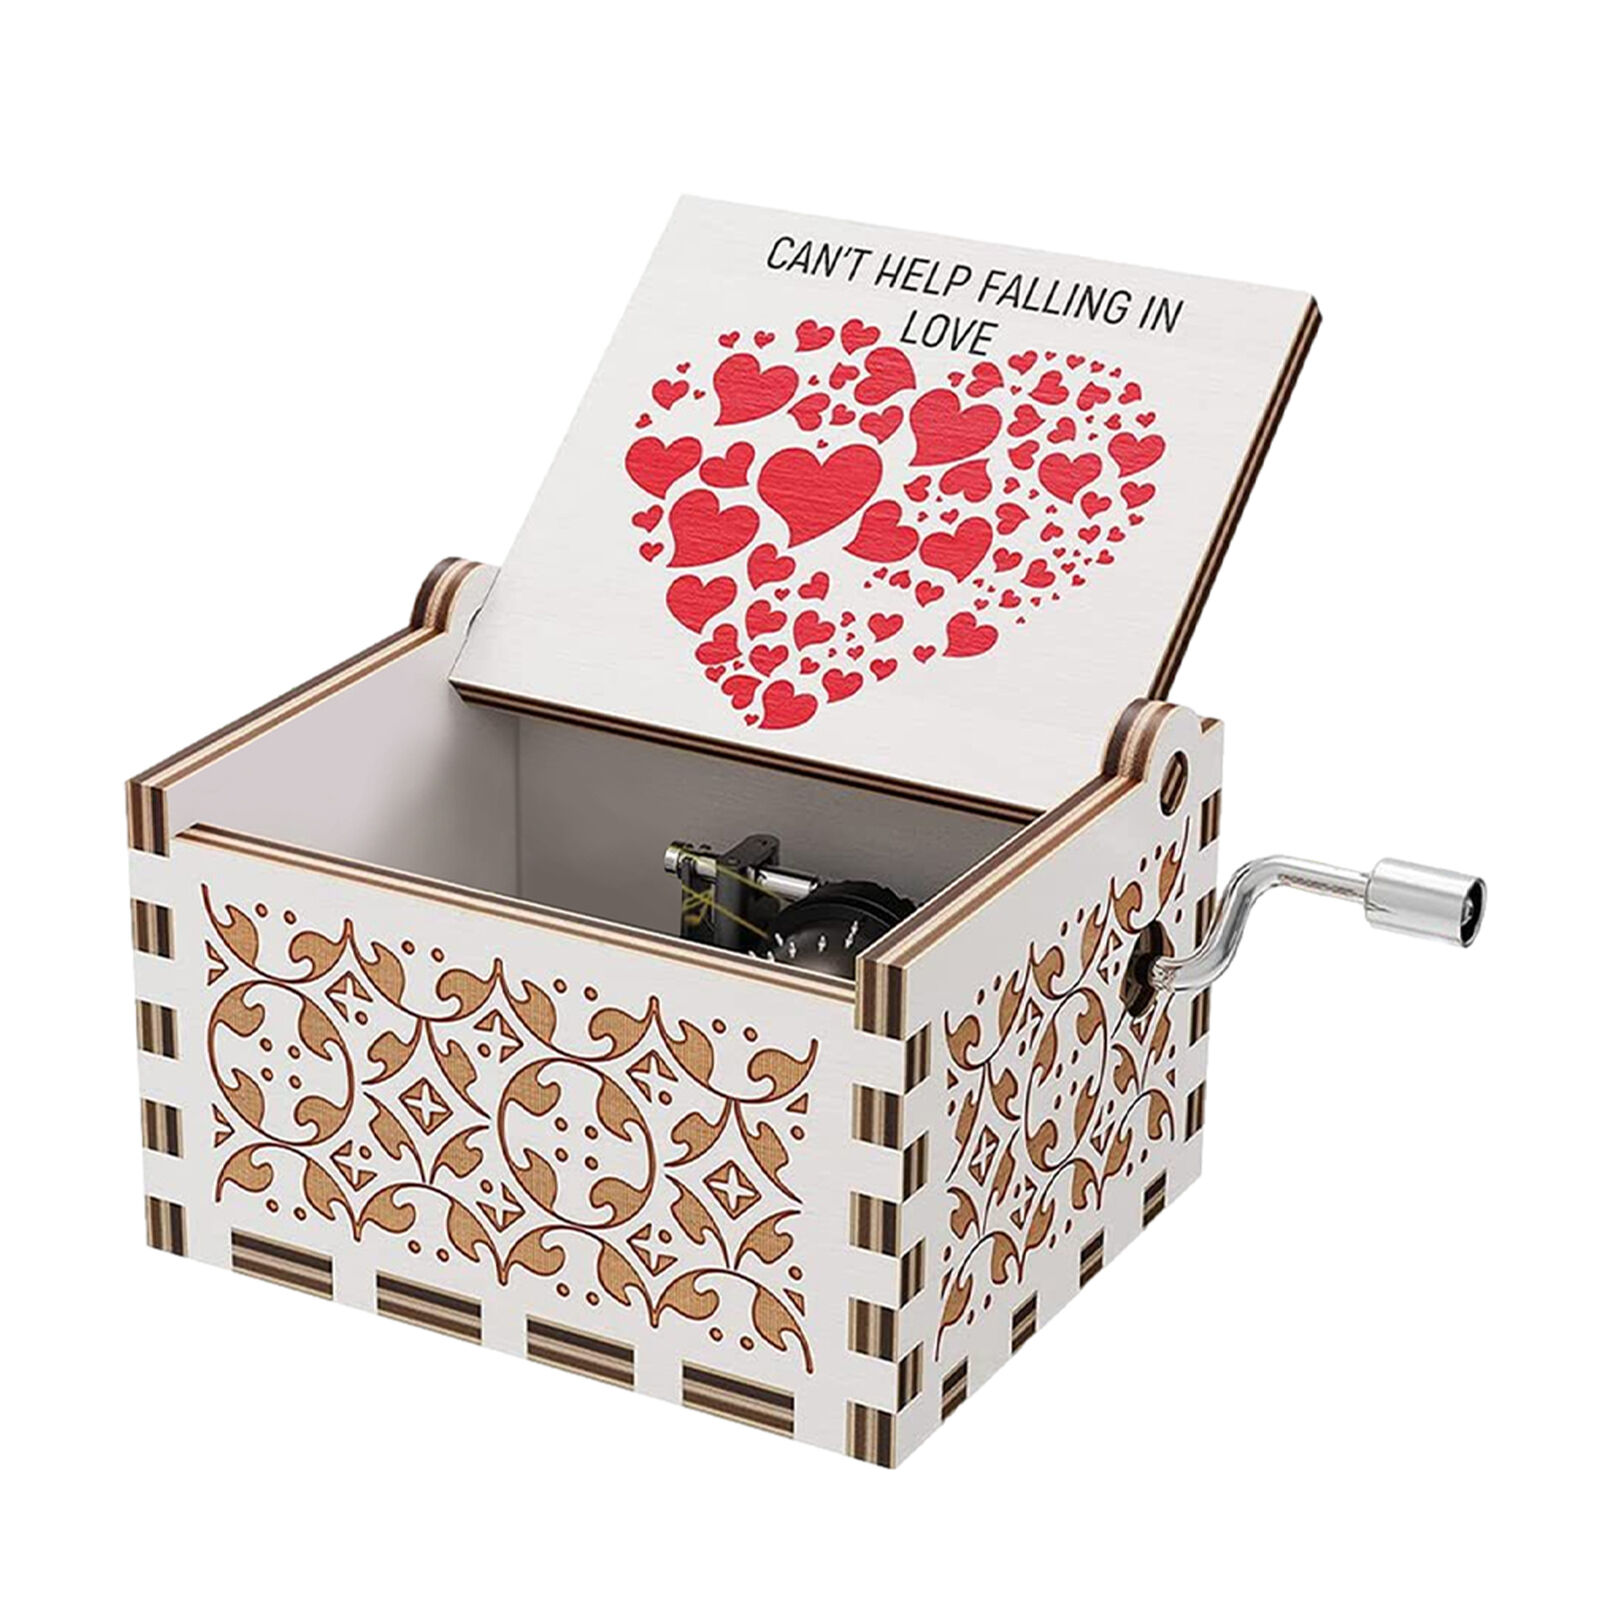 Falling In Love With You Music Box Wooden Musical Boxes for Valentine's Day Gift